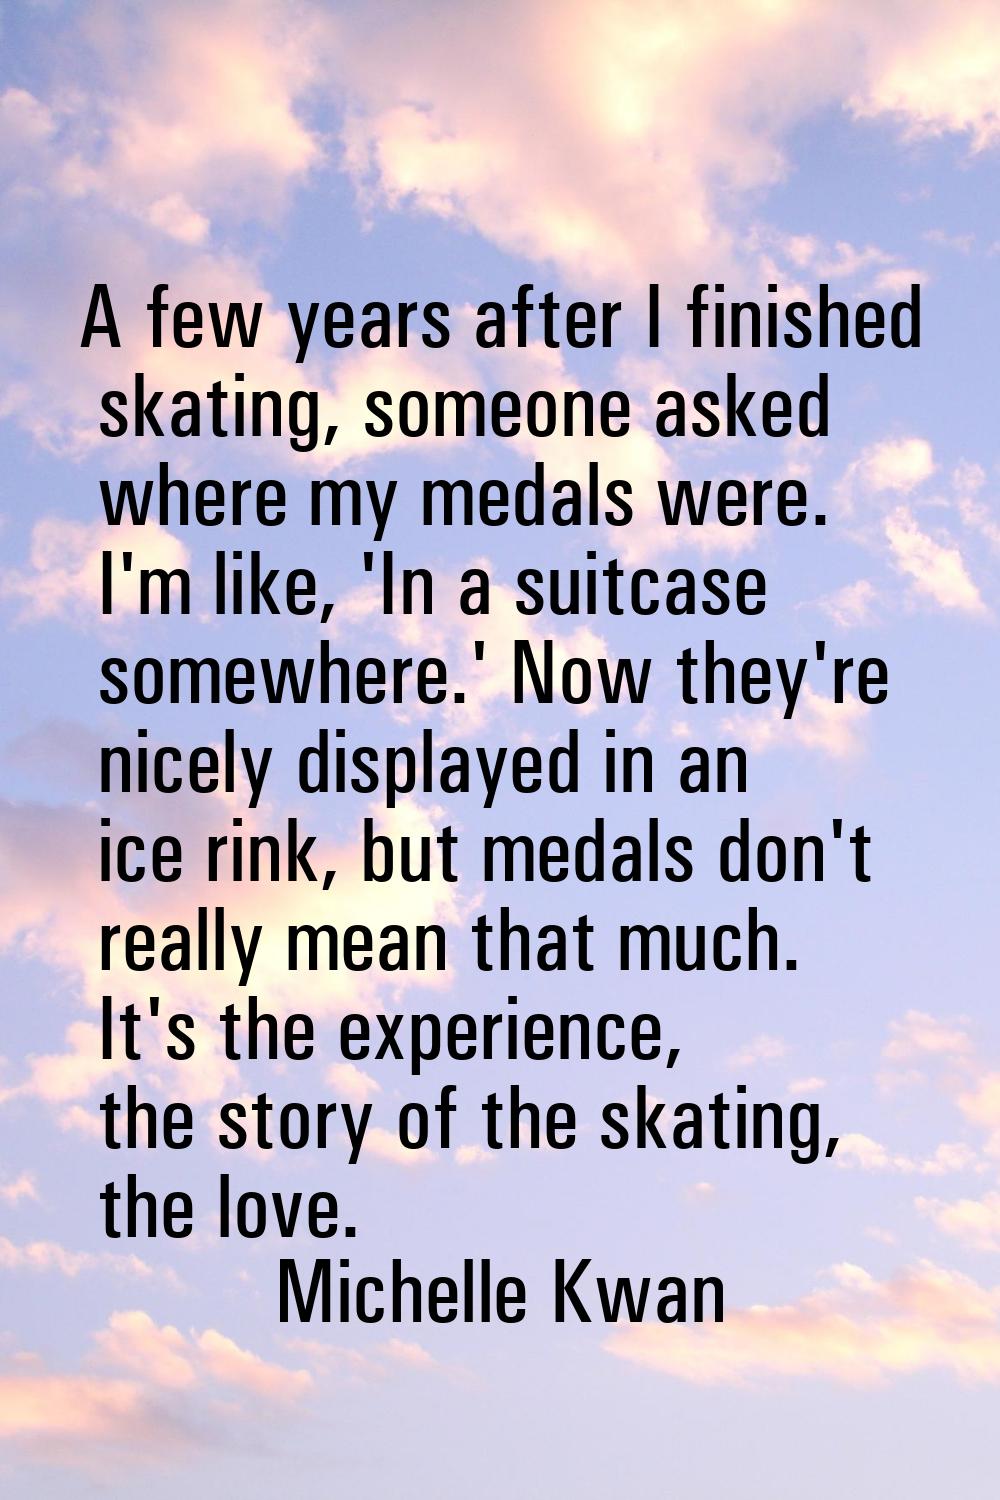 A few years after I finished skating, someone asked where my medals were. I'm like, 'In a suitcase 